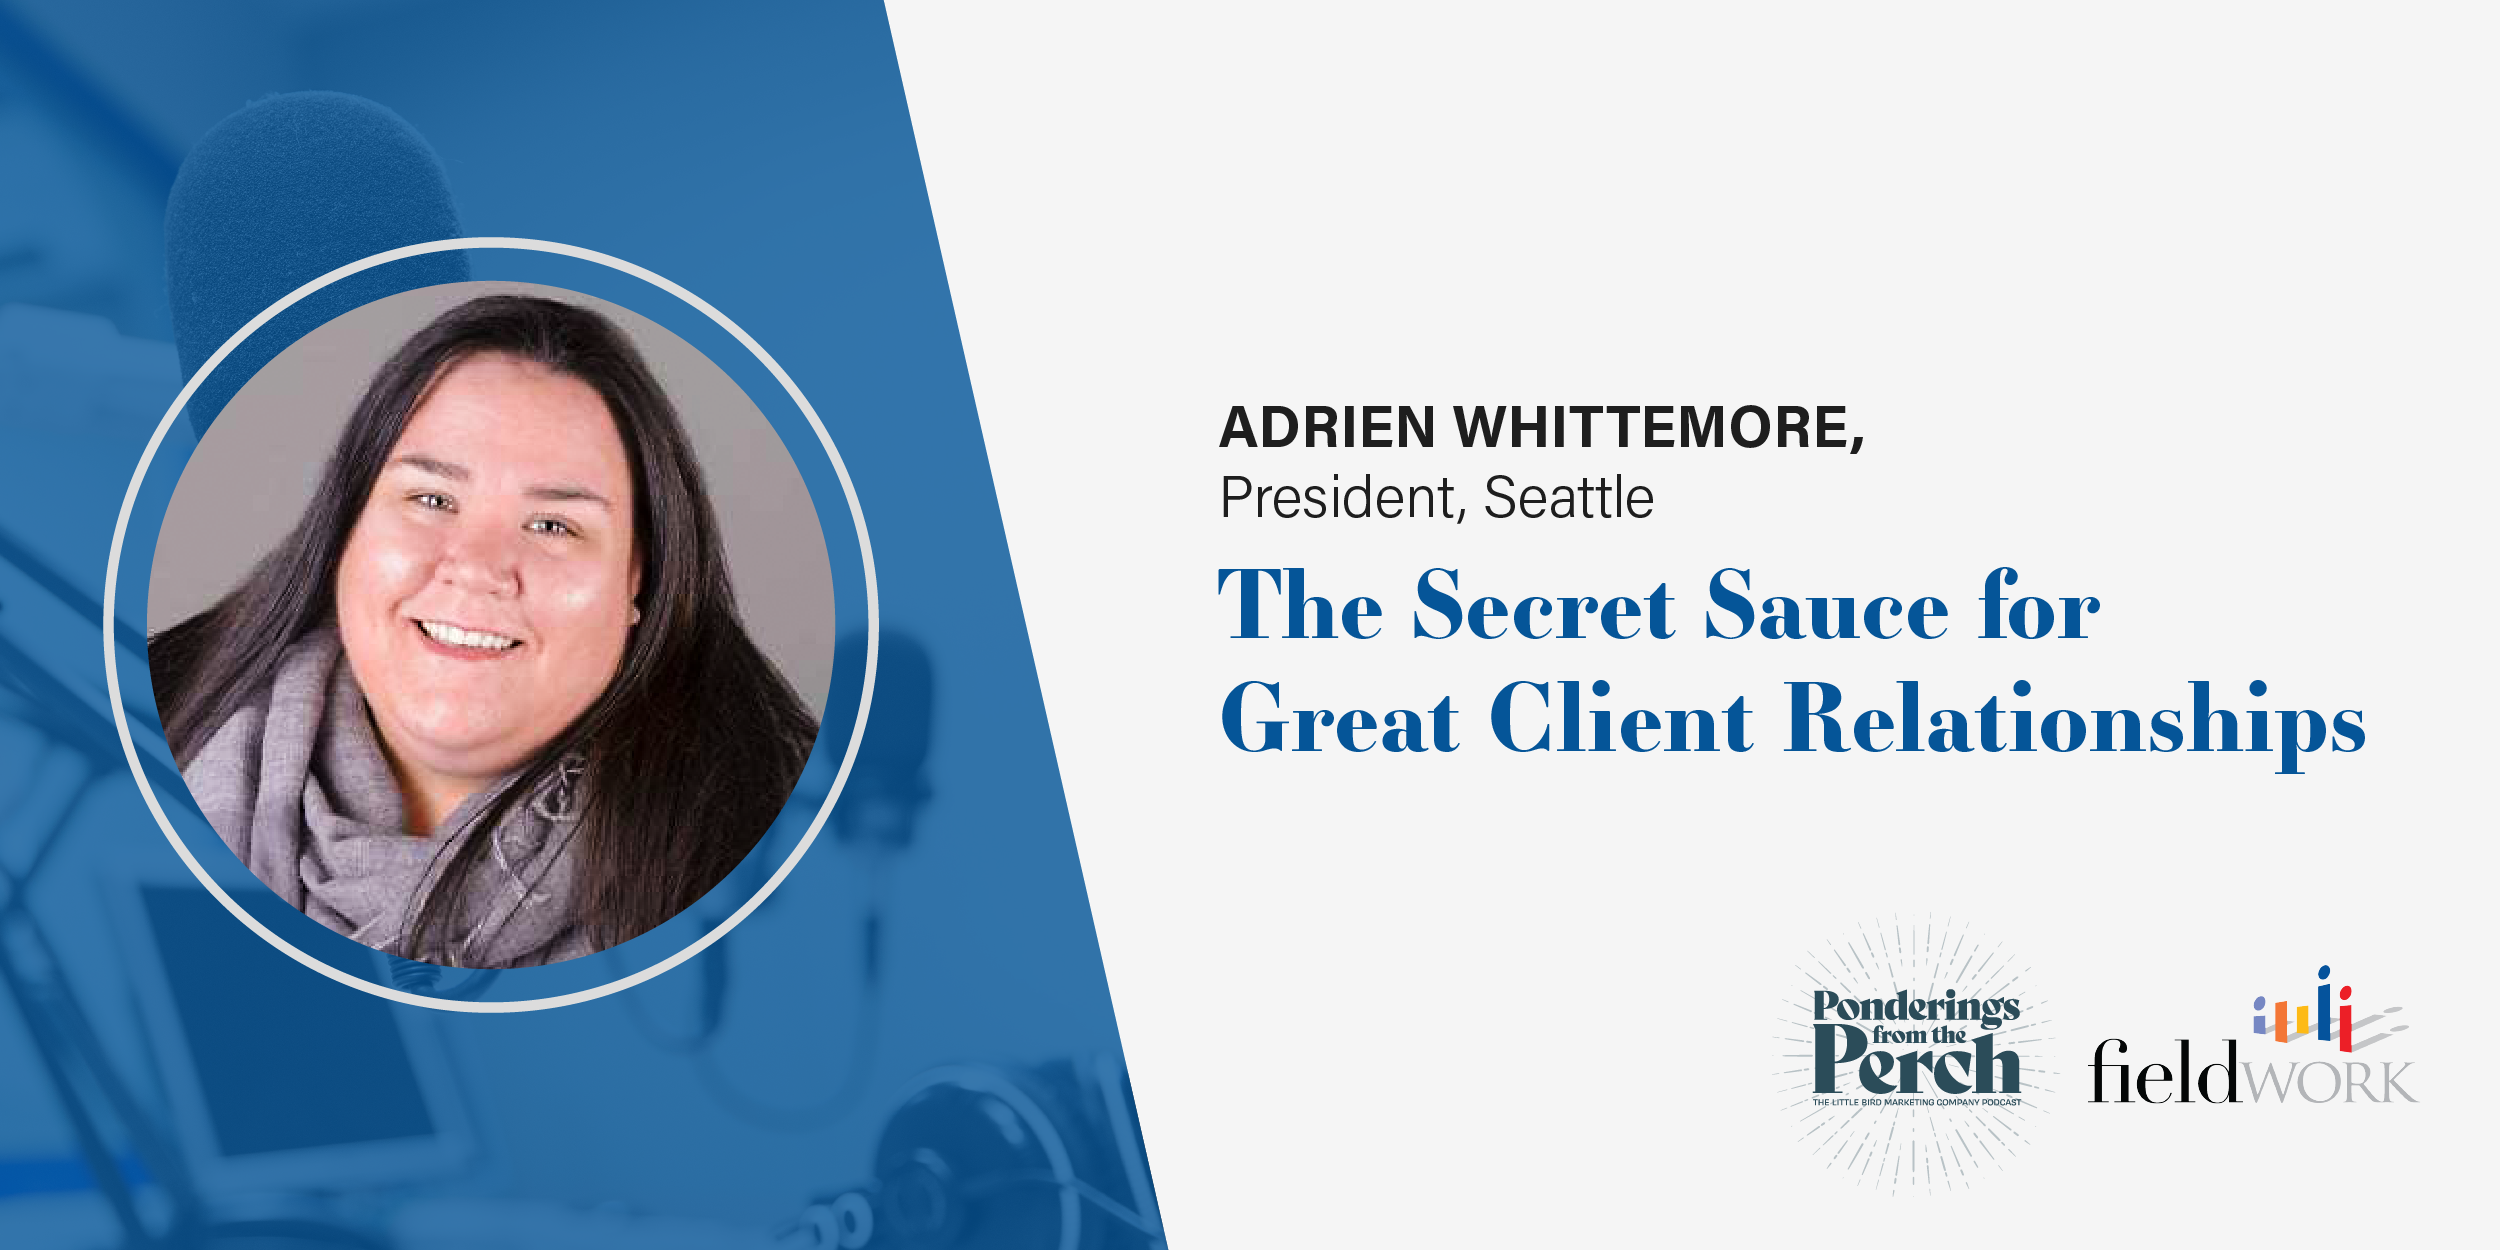 Fieldwork's Secret Sauce for Great Client Relationships with Adrien Whittemore